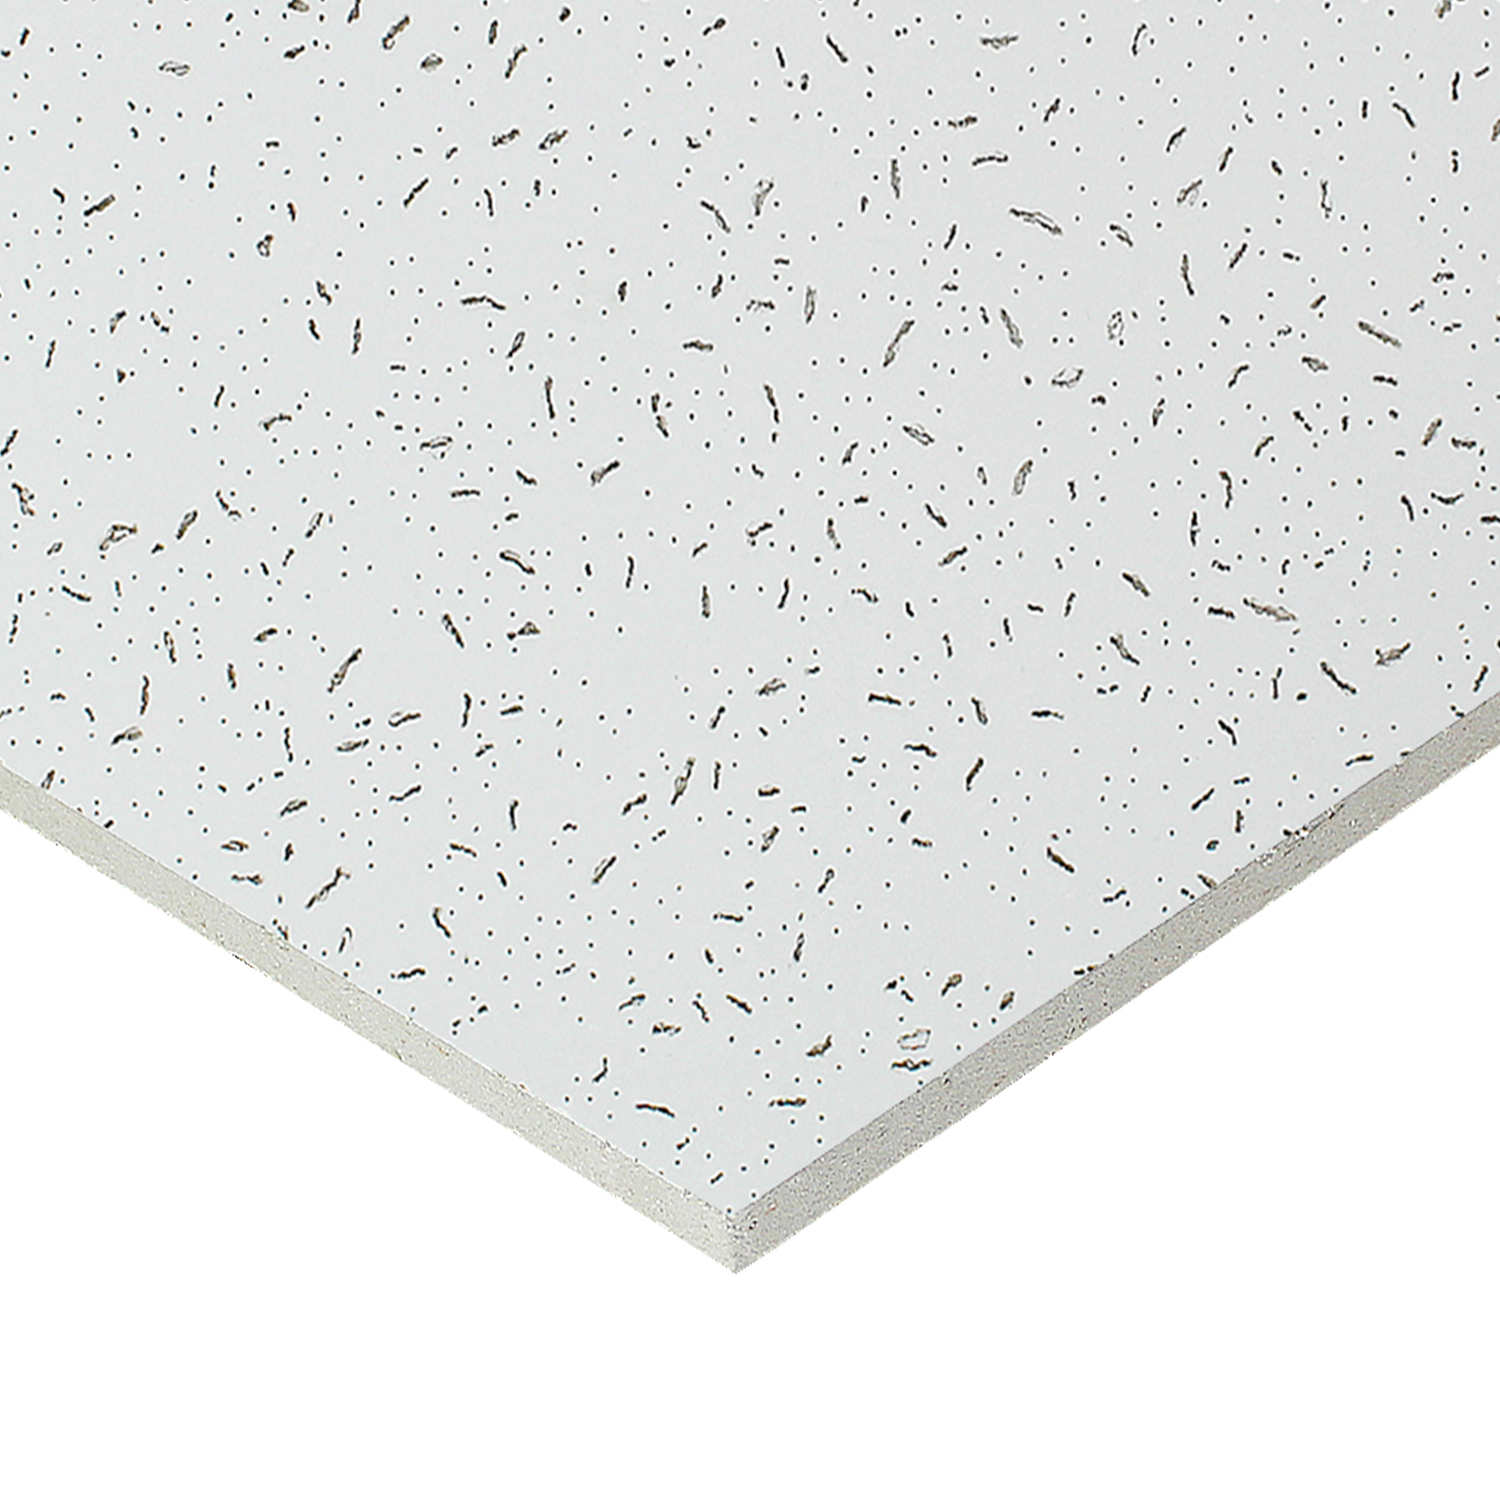 ND FISSURED Suspended Ceiling tiles 1200mm x 600mm (Box Qty: 10)